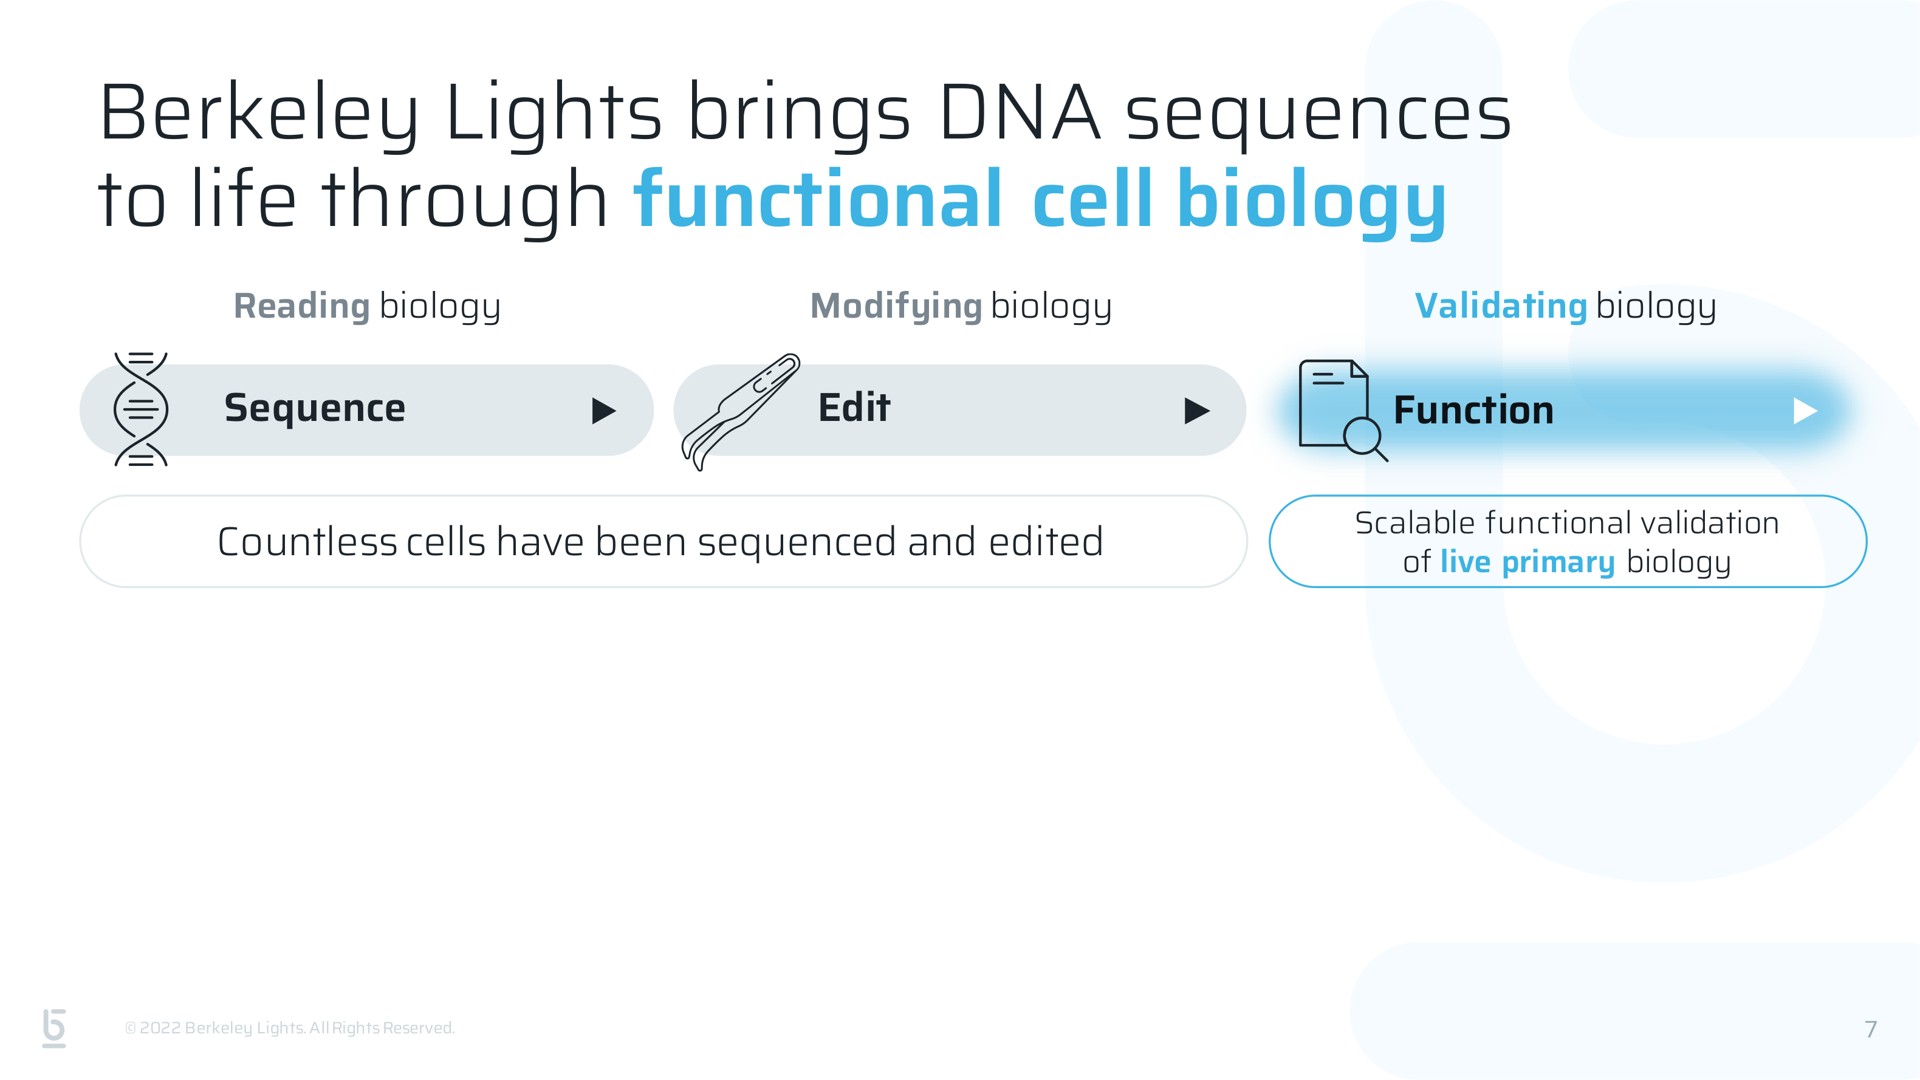 lights brings sequences to life through functional cell biology | Berkeley Lights